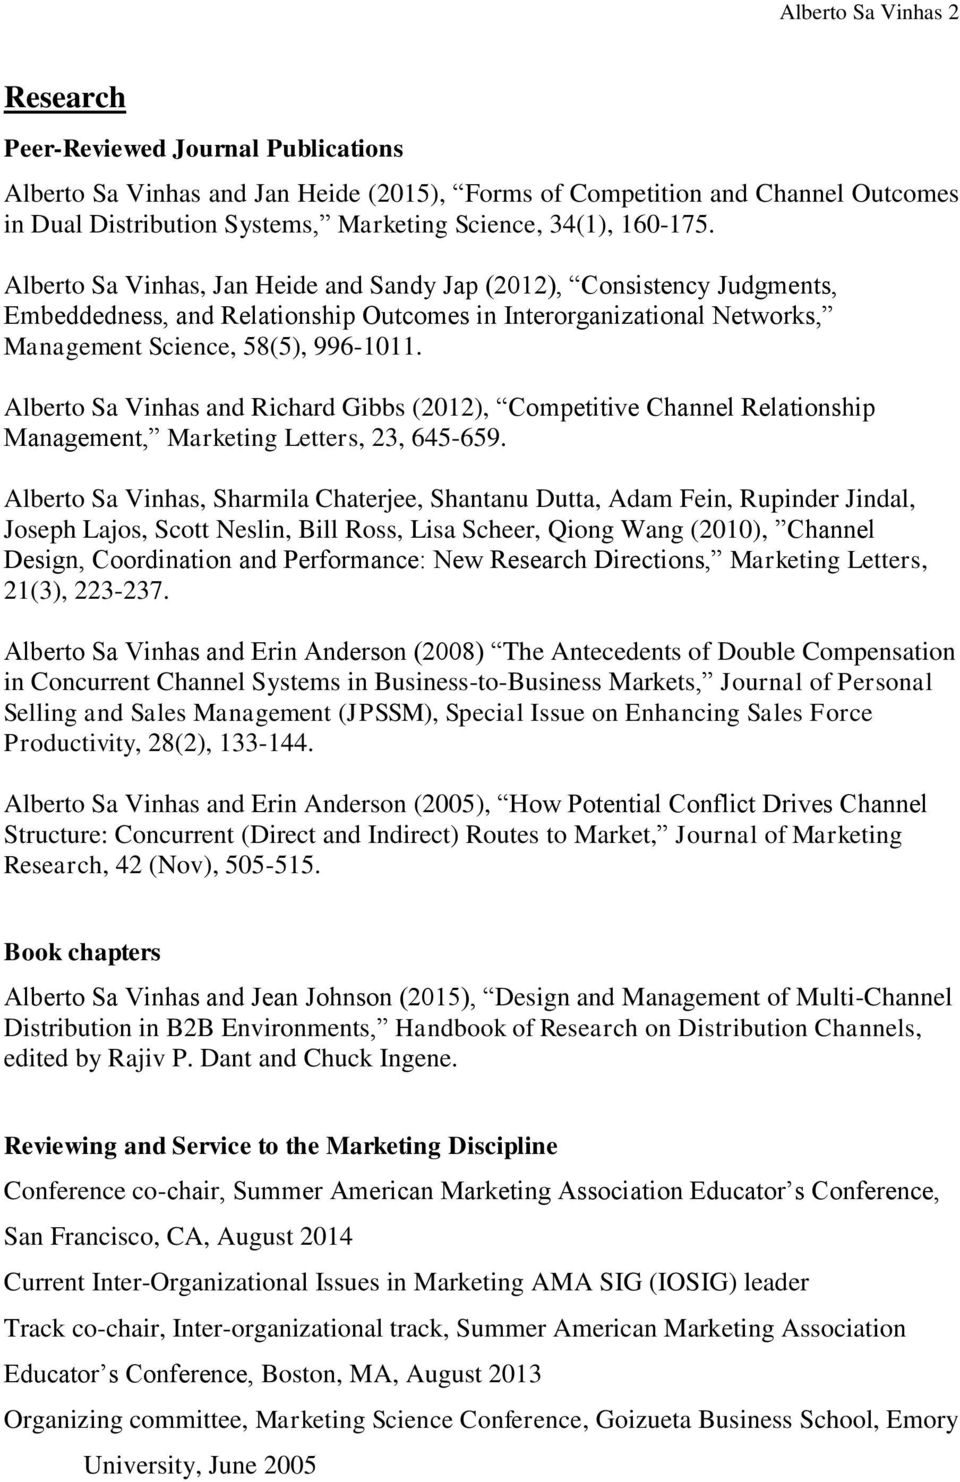 Alberto Sa Vinhas and Richard Gibbs (2012), Competitive Channel Relationship Management, Marketing Letters, 23, 645-659.